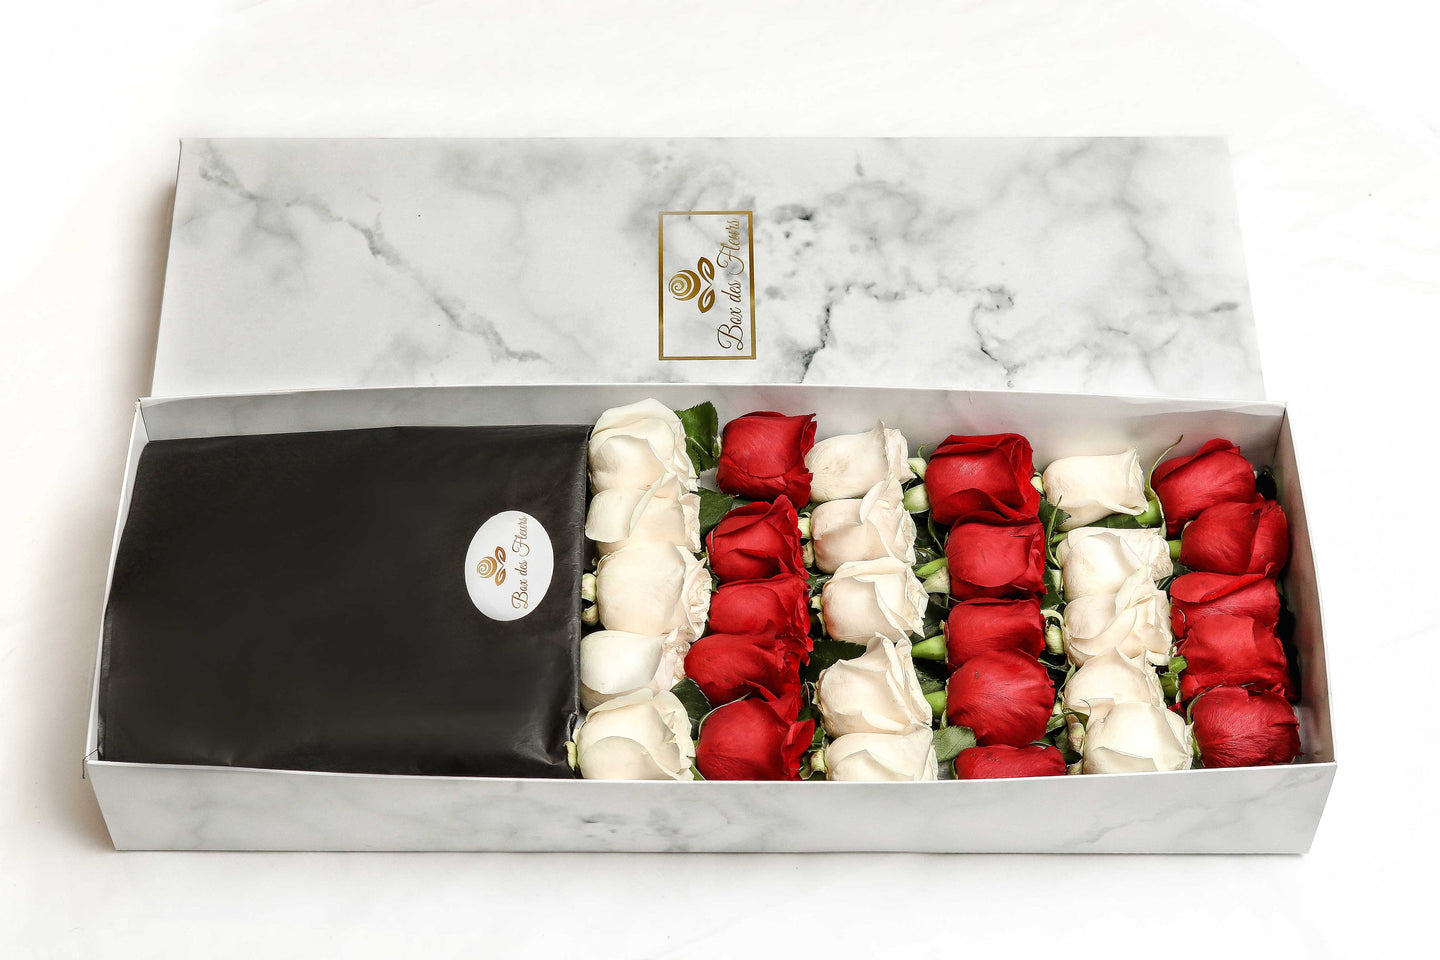 A close-up of 30 roses in a luxury marble box by Vancouver's Box des Fleeurs. The arrangement has an alternating color combination of red and white roses.